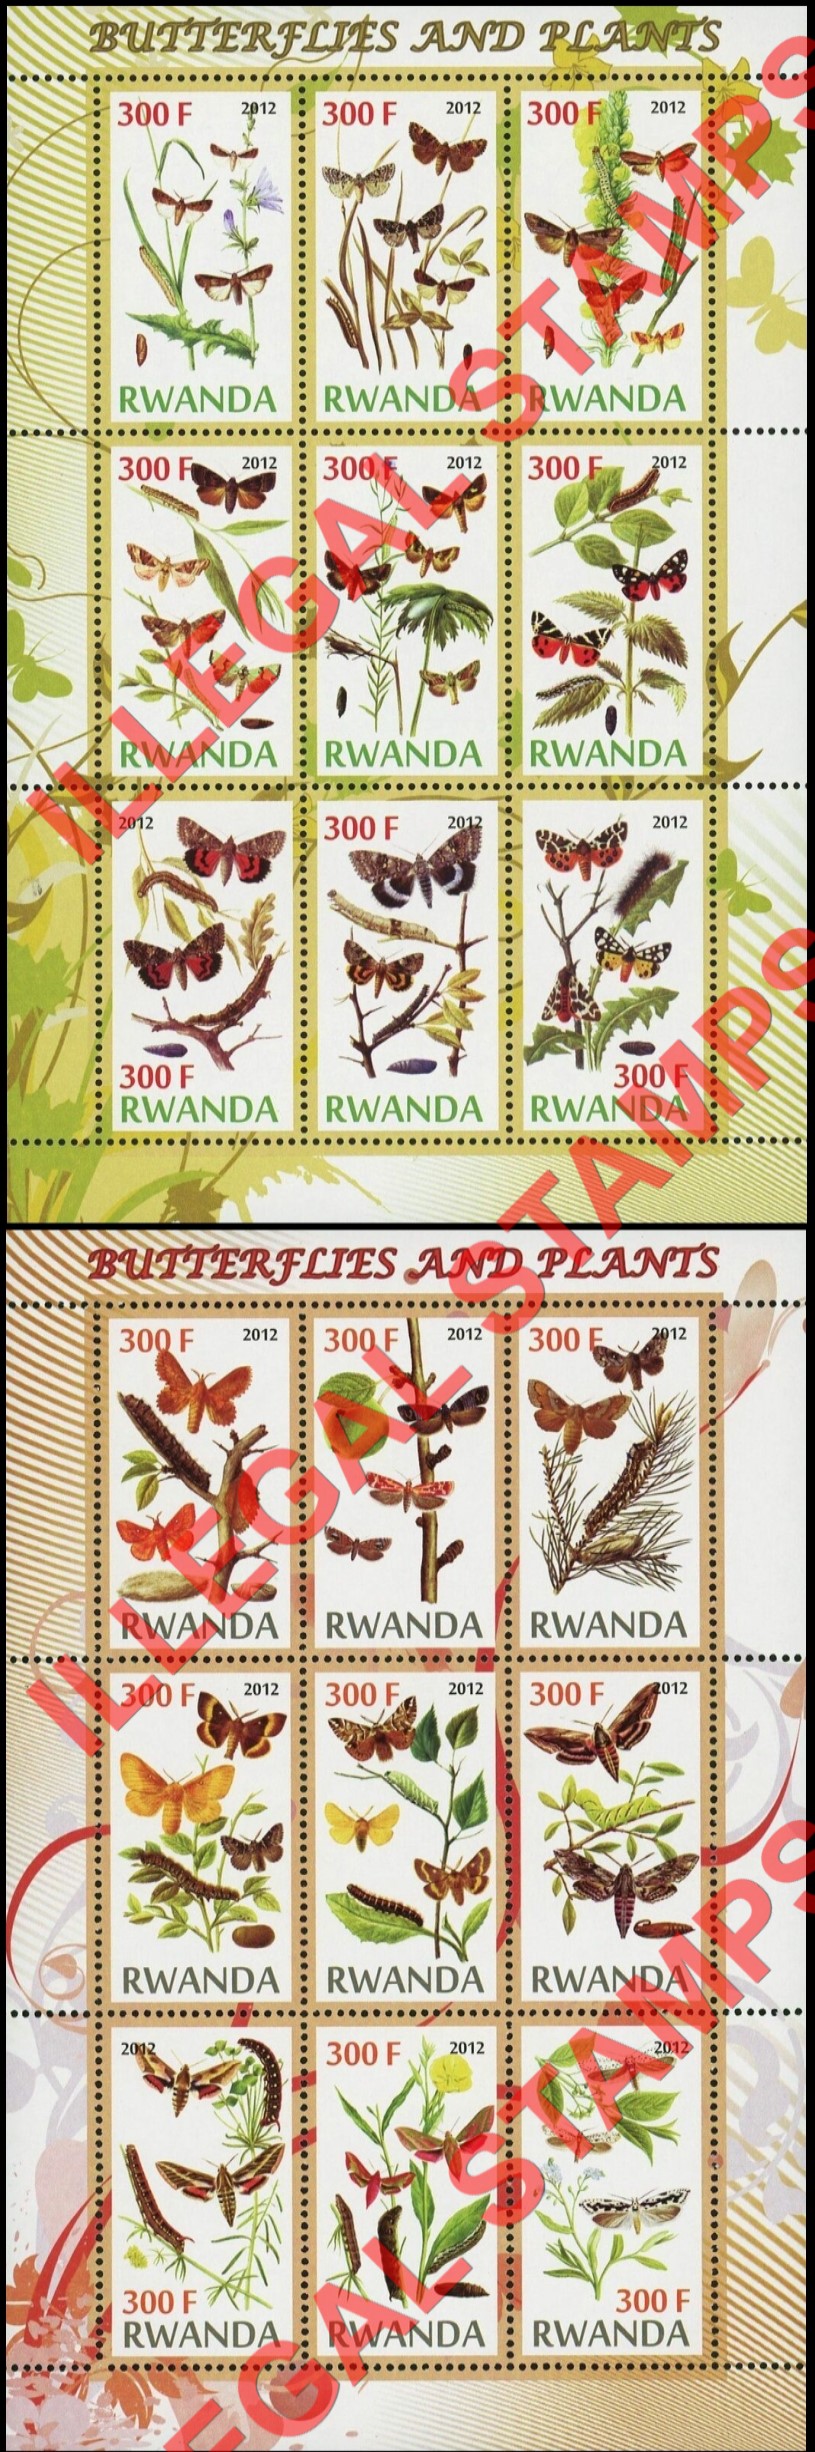 Rwanda 2012 Butterflies and Plants Illegal Stamp Sheets of 9